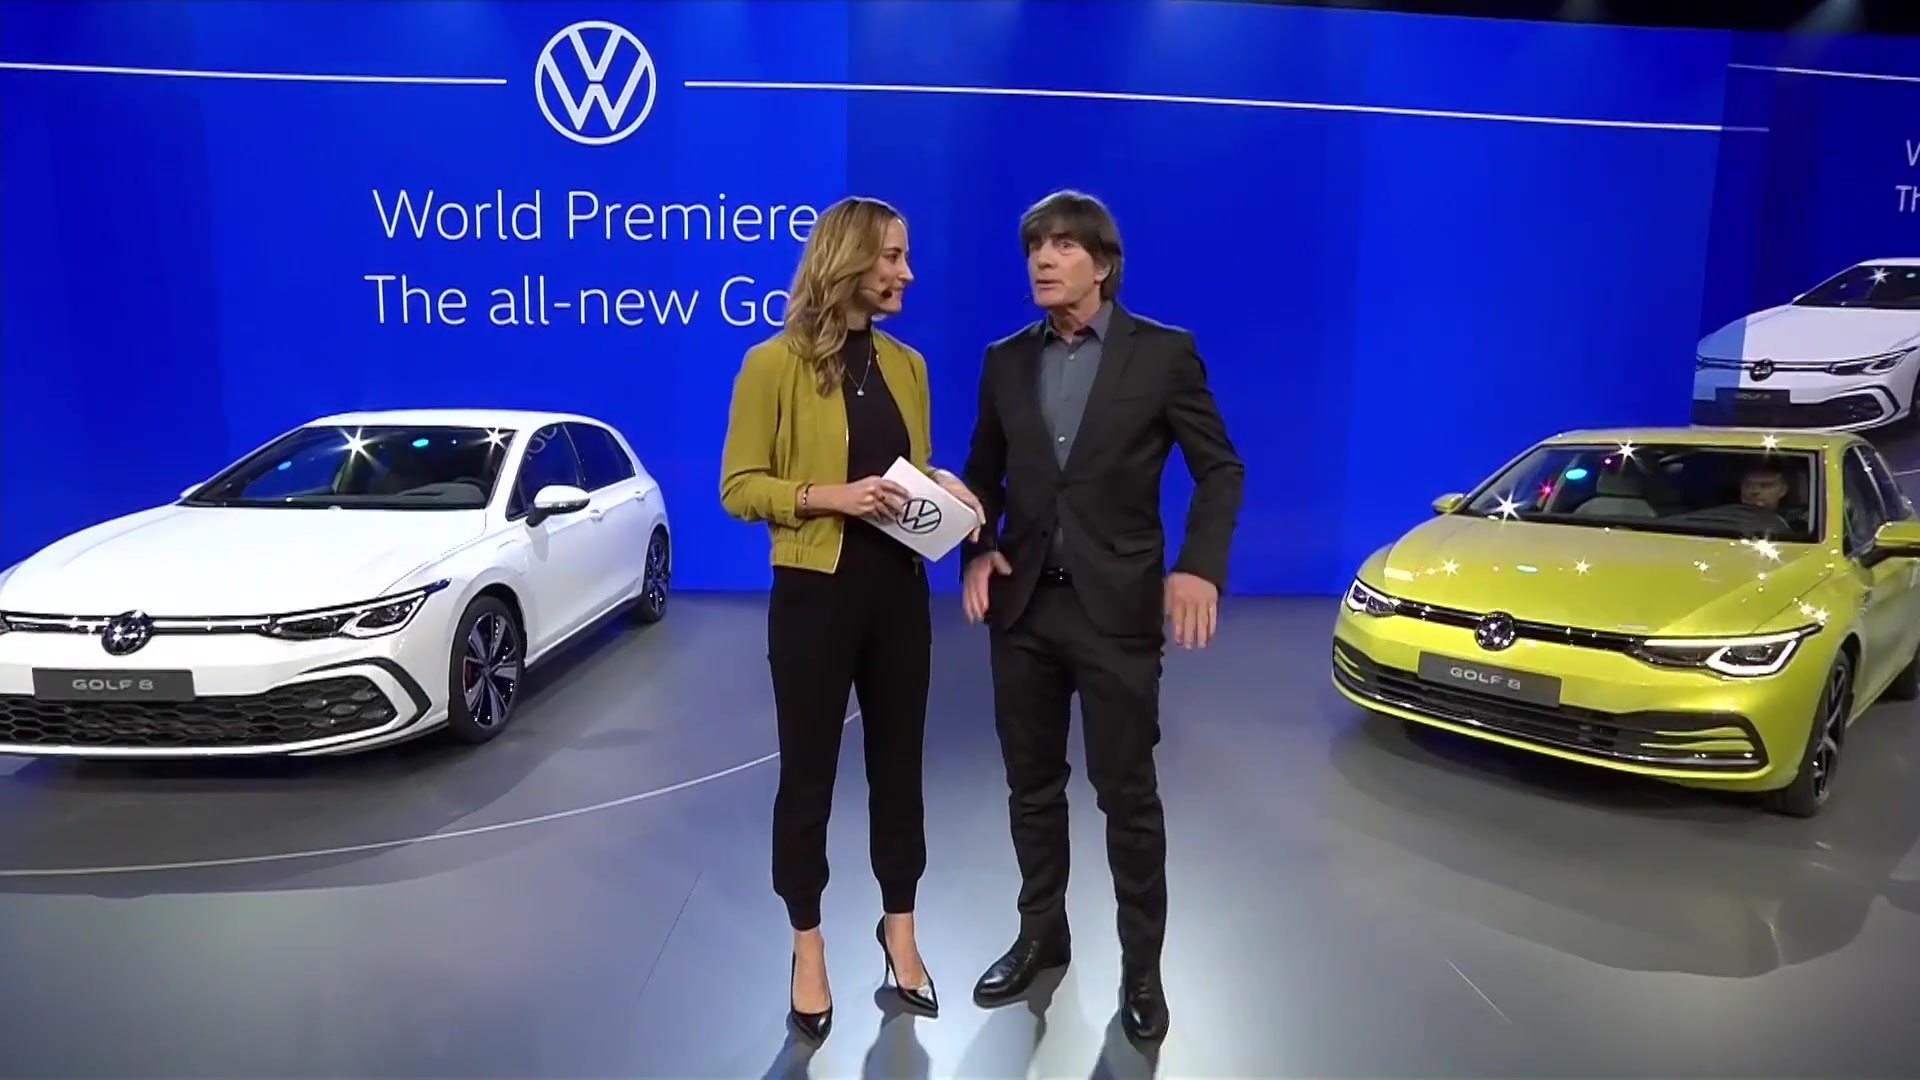 World premiere of the all-new Volkswagen Golf 8 - Joachim Löw - video  Dailymotion